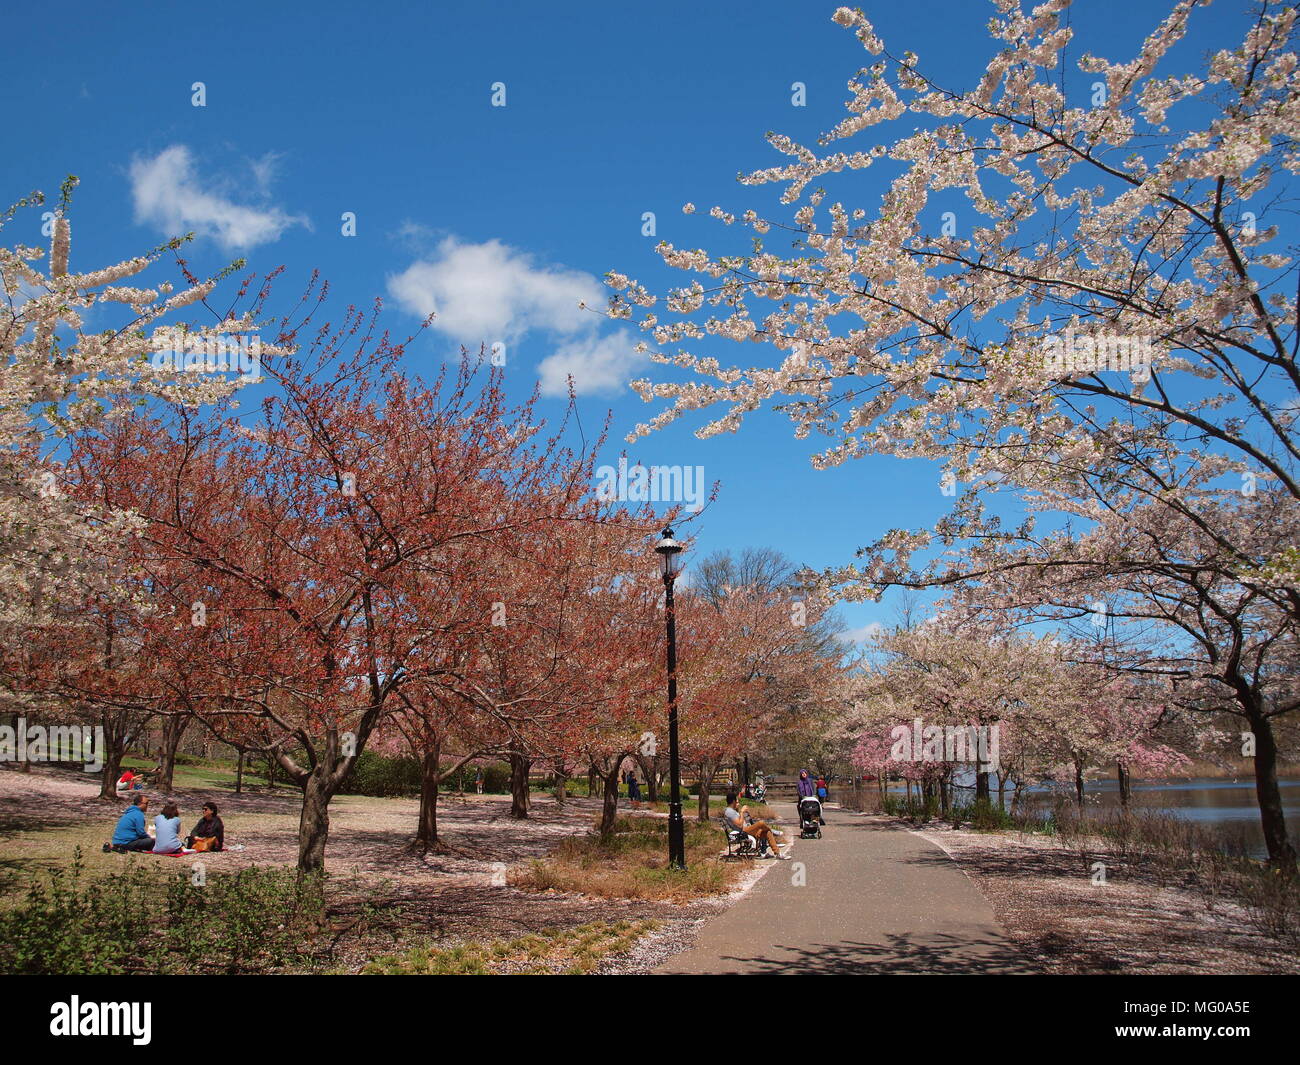 Cherry trees blooming in Spring at Branch Brook Park, Newark, NJ Stock Photo